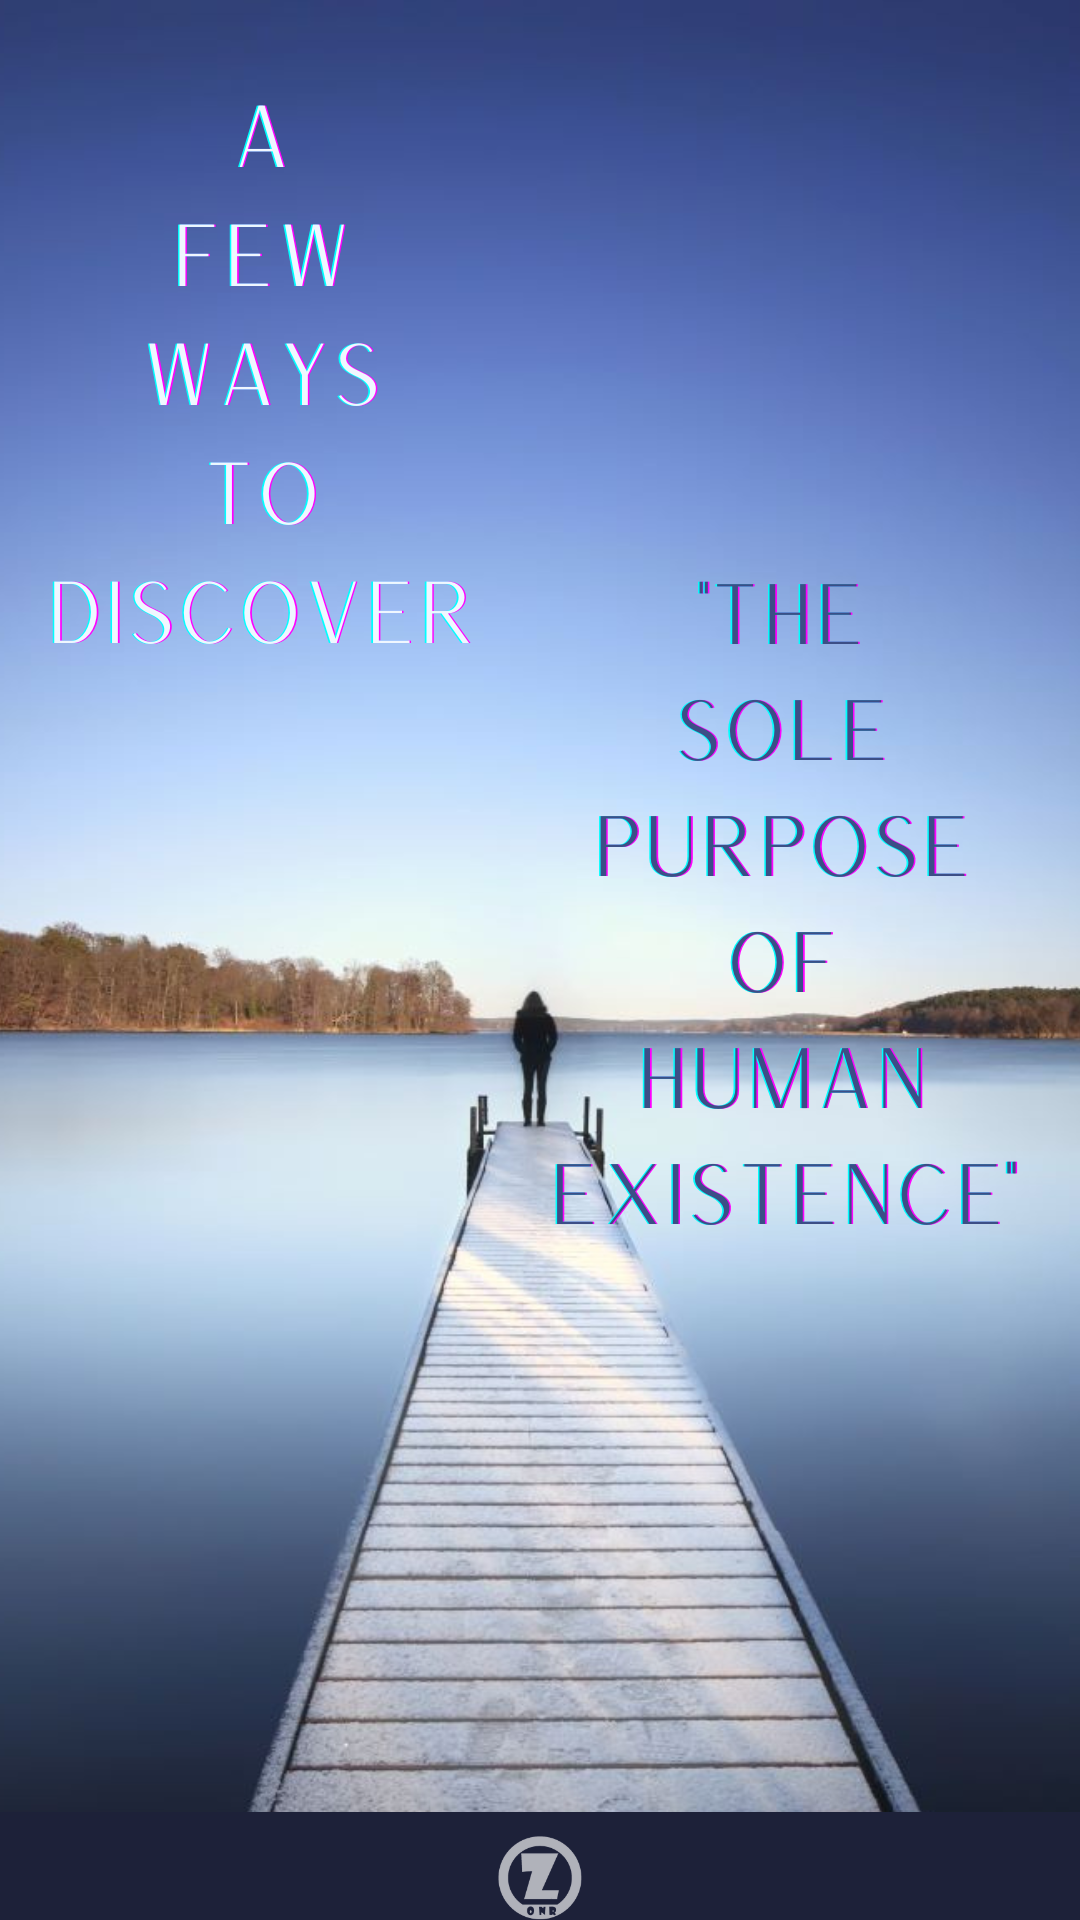 You are currently viewing A Few Ways to Discover “The Sole Purpose of Human Existence” – Step 4